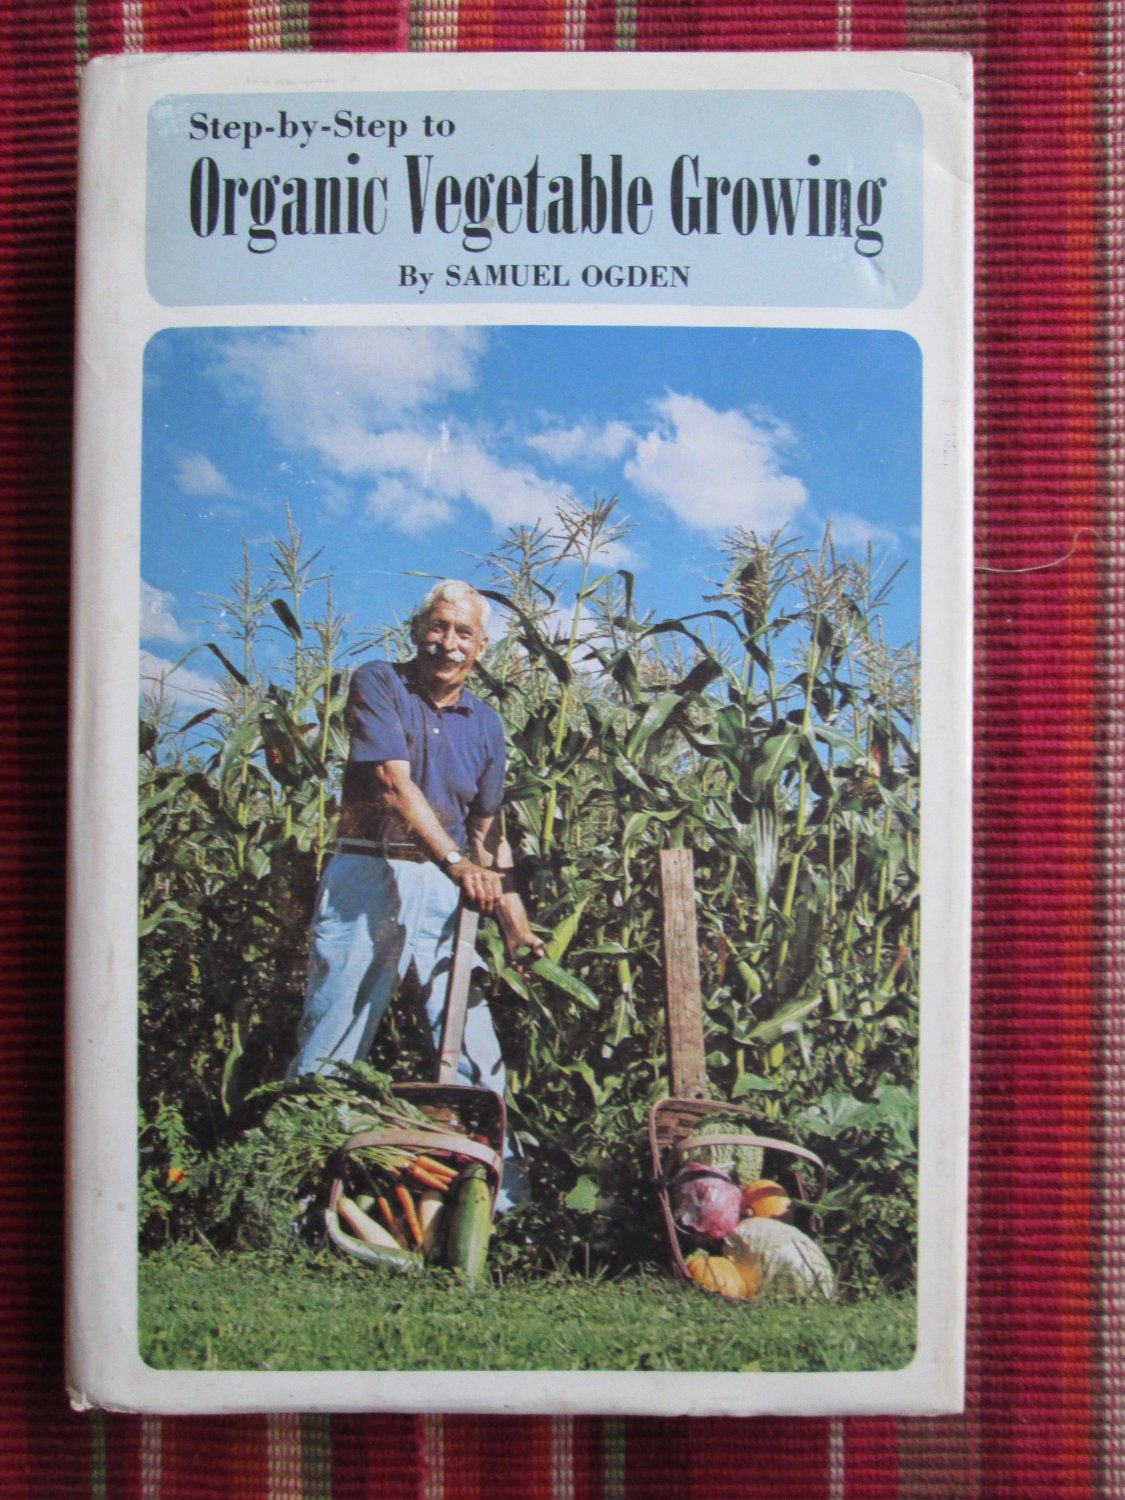 Step-by-Step to Organic Vegetable Growing by Samuel R Ogden Rodale Press 1971 Fifth Printing